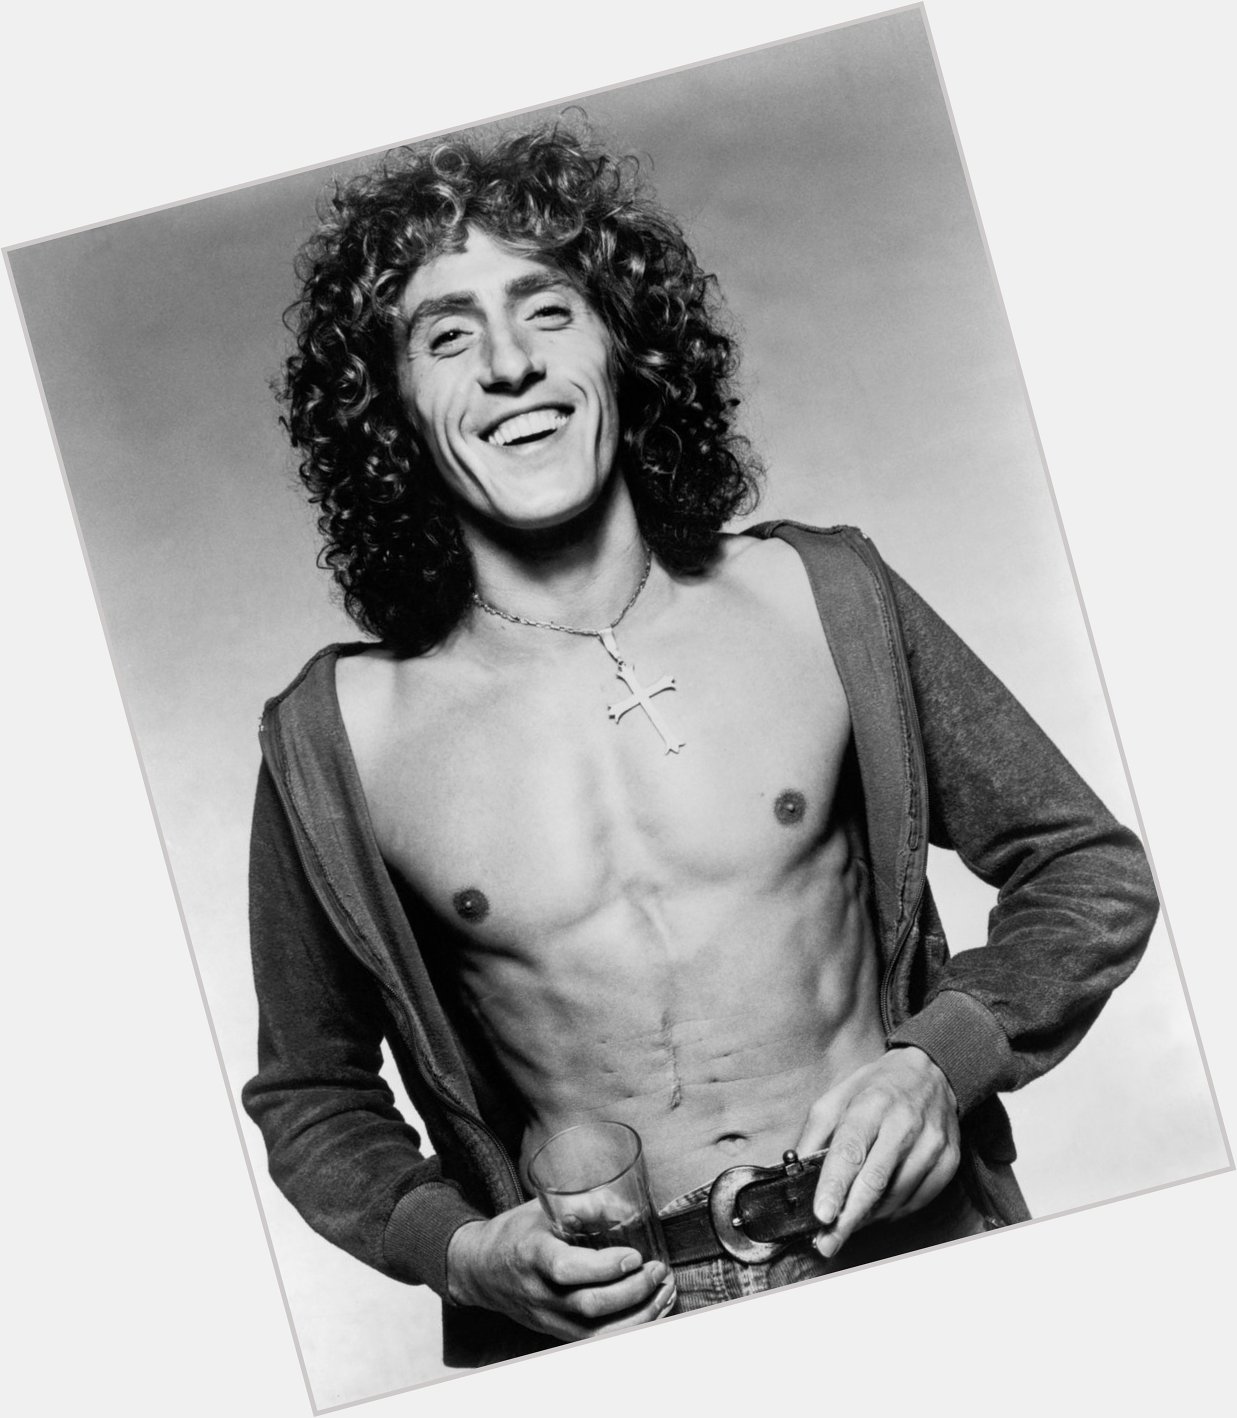 Happy birthday to roger daltrey, the founding member of the who (also an actual angel) 